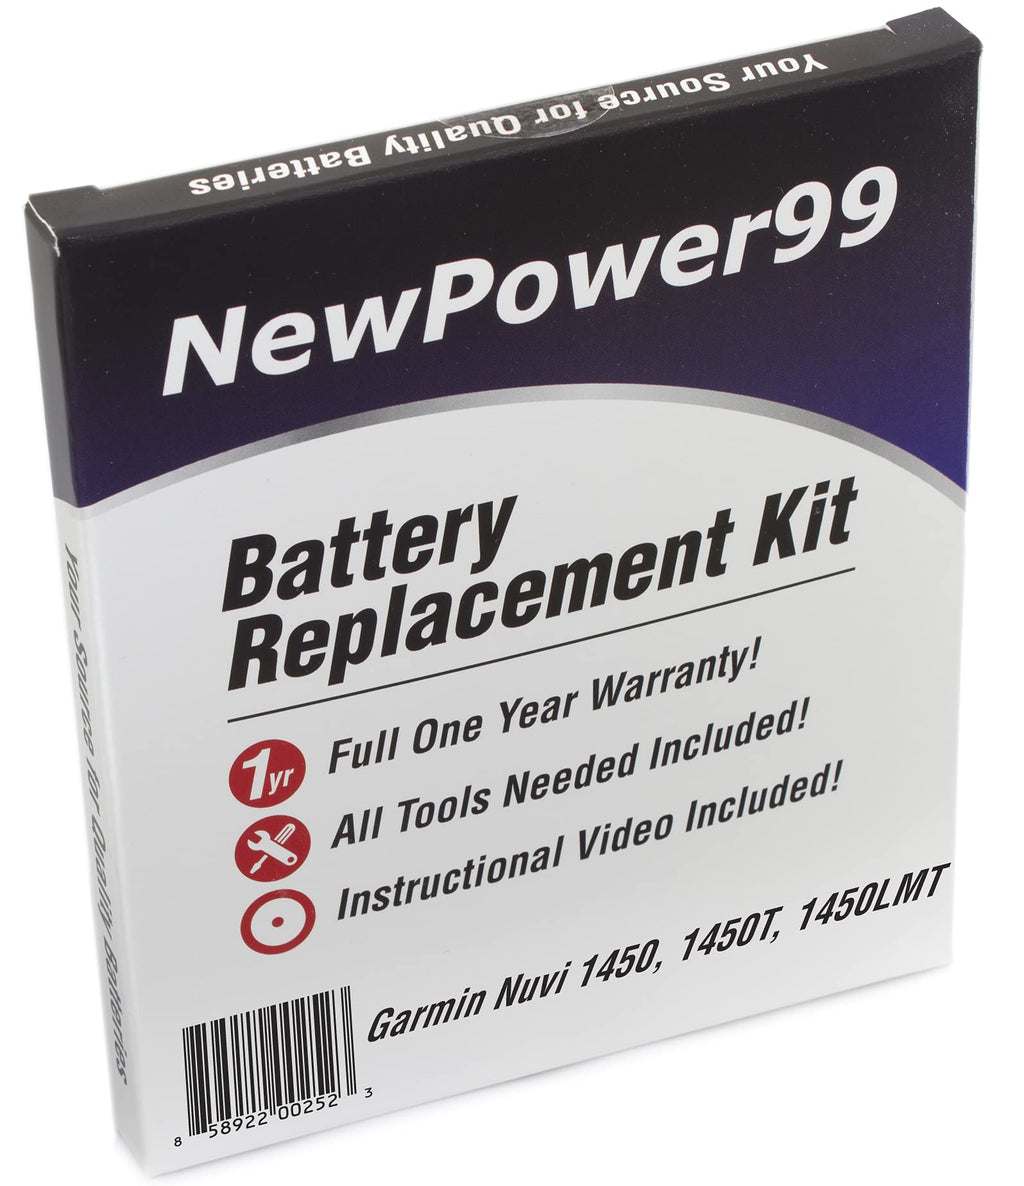 NewPower99 Battery Replacement Kit for Garmin Nuvi 1450, 1450T, 1450LMT with Tools, Video Instructions, Long Life Battery - LeoForward Australia